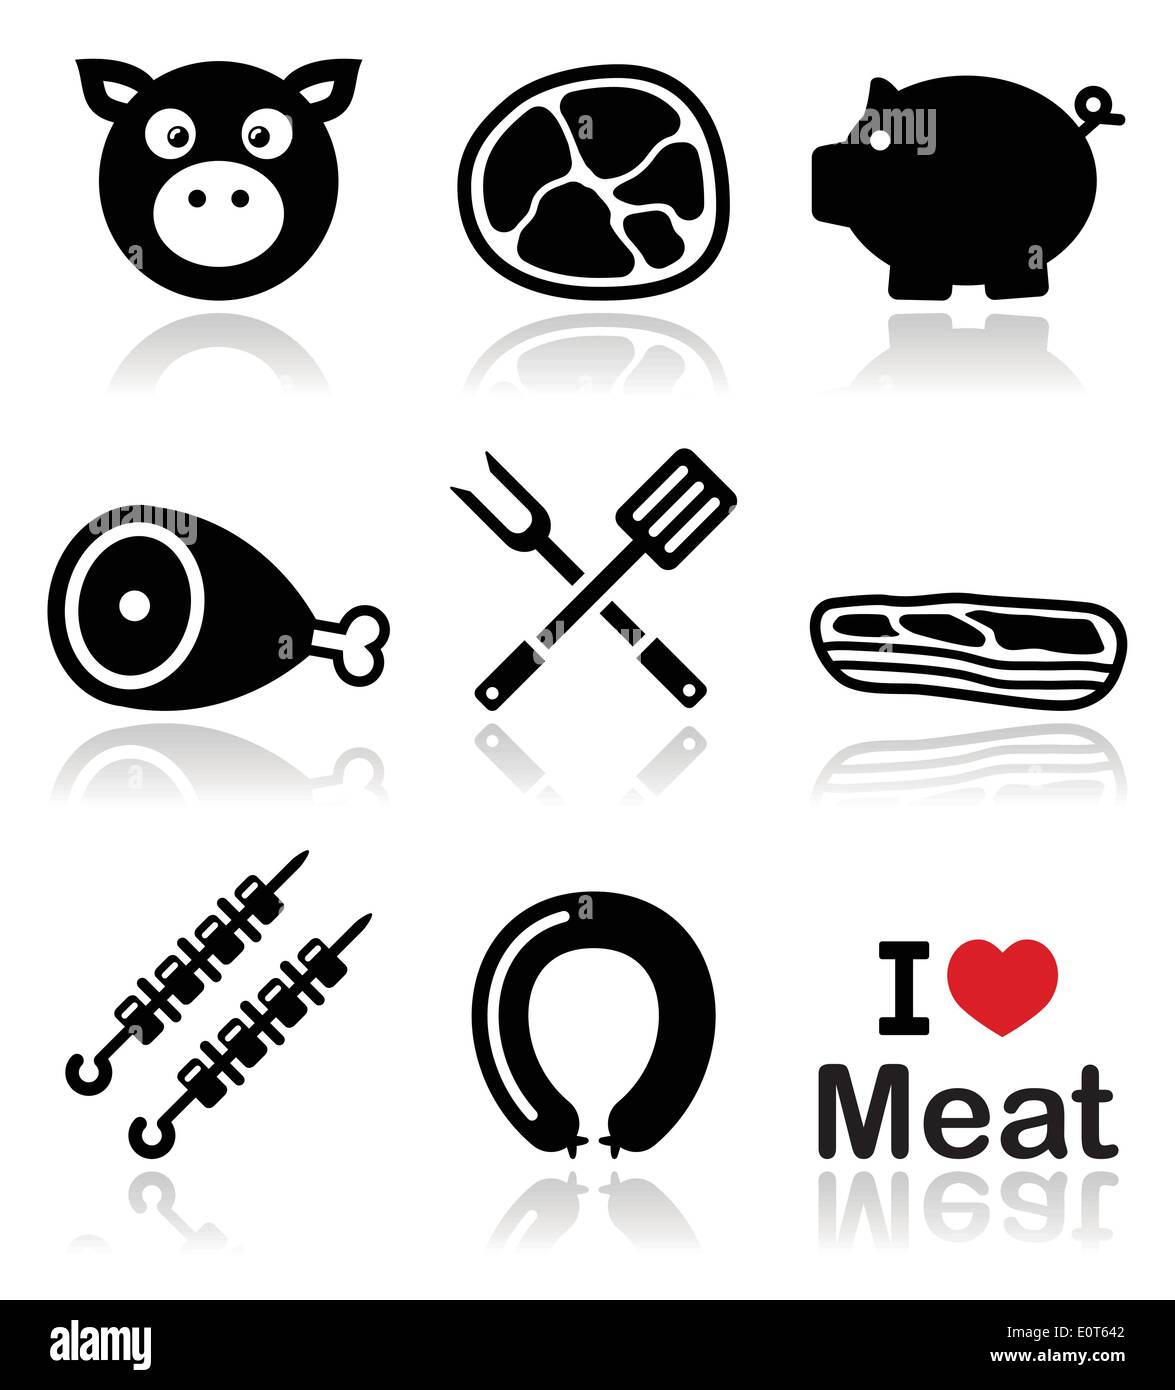 Pig, pork meat - ham and bacon icons set Stock Vector